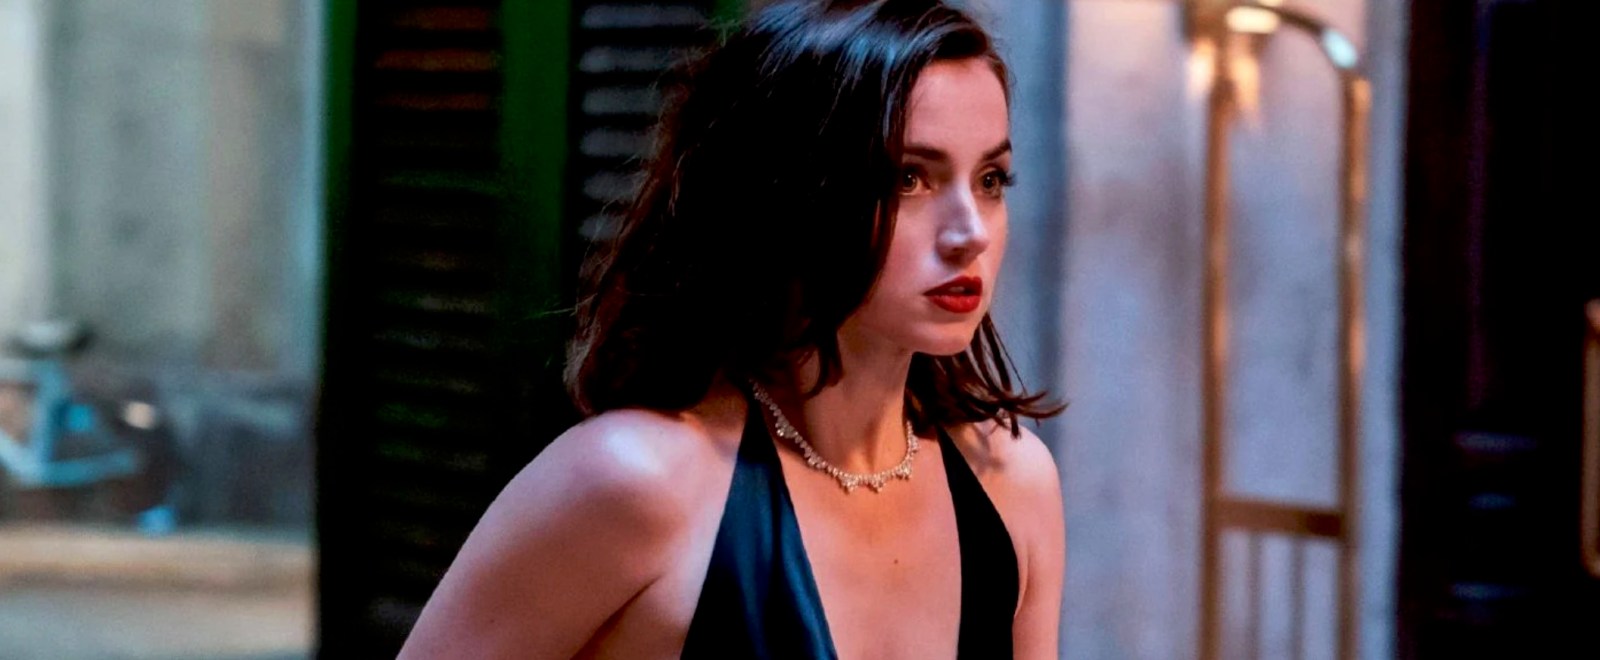 Ana De Armas James Bond: Actress Says There Shouldn't Be A Female 007